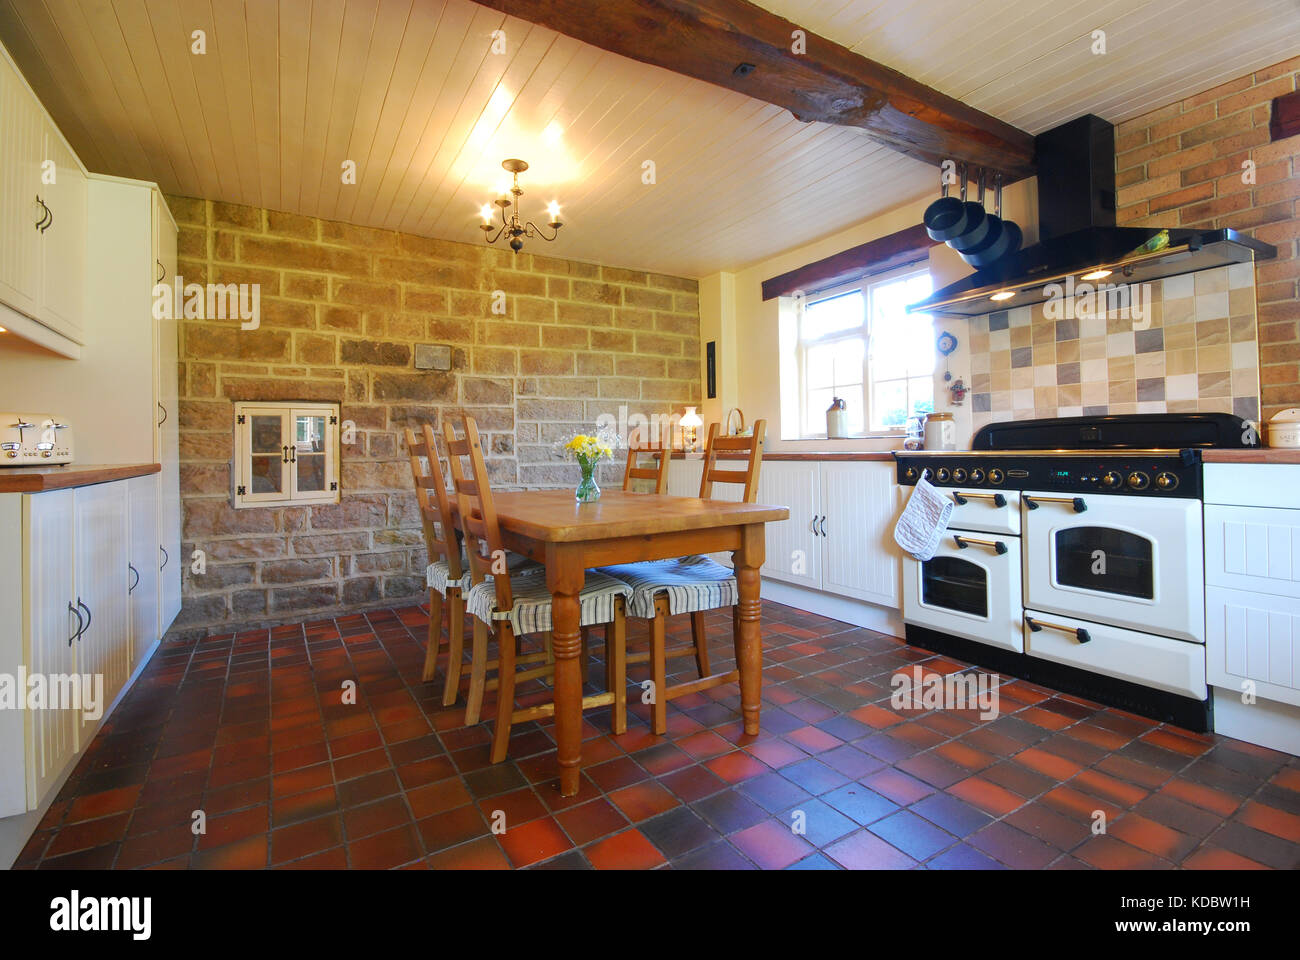 Farm kitchen with terracotta tiled floor and exposed stone work Stock Photo